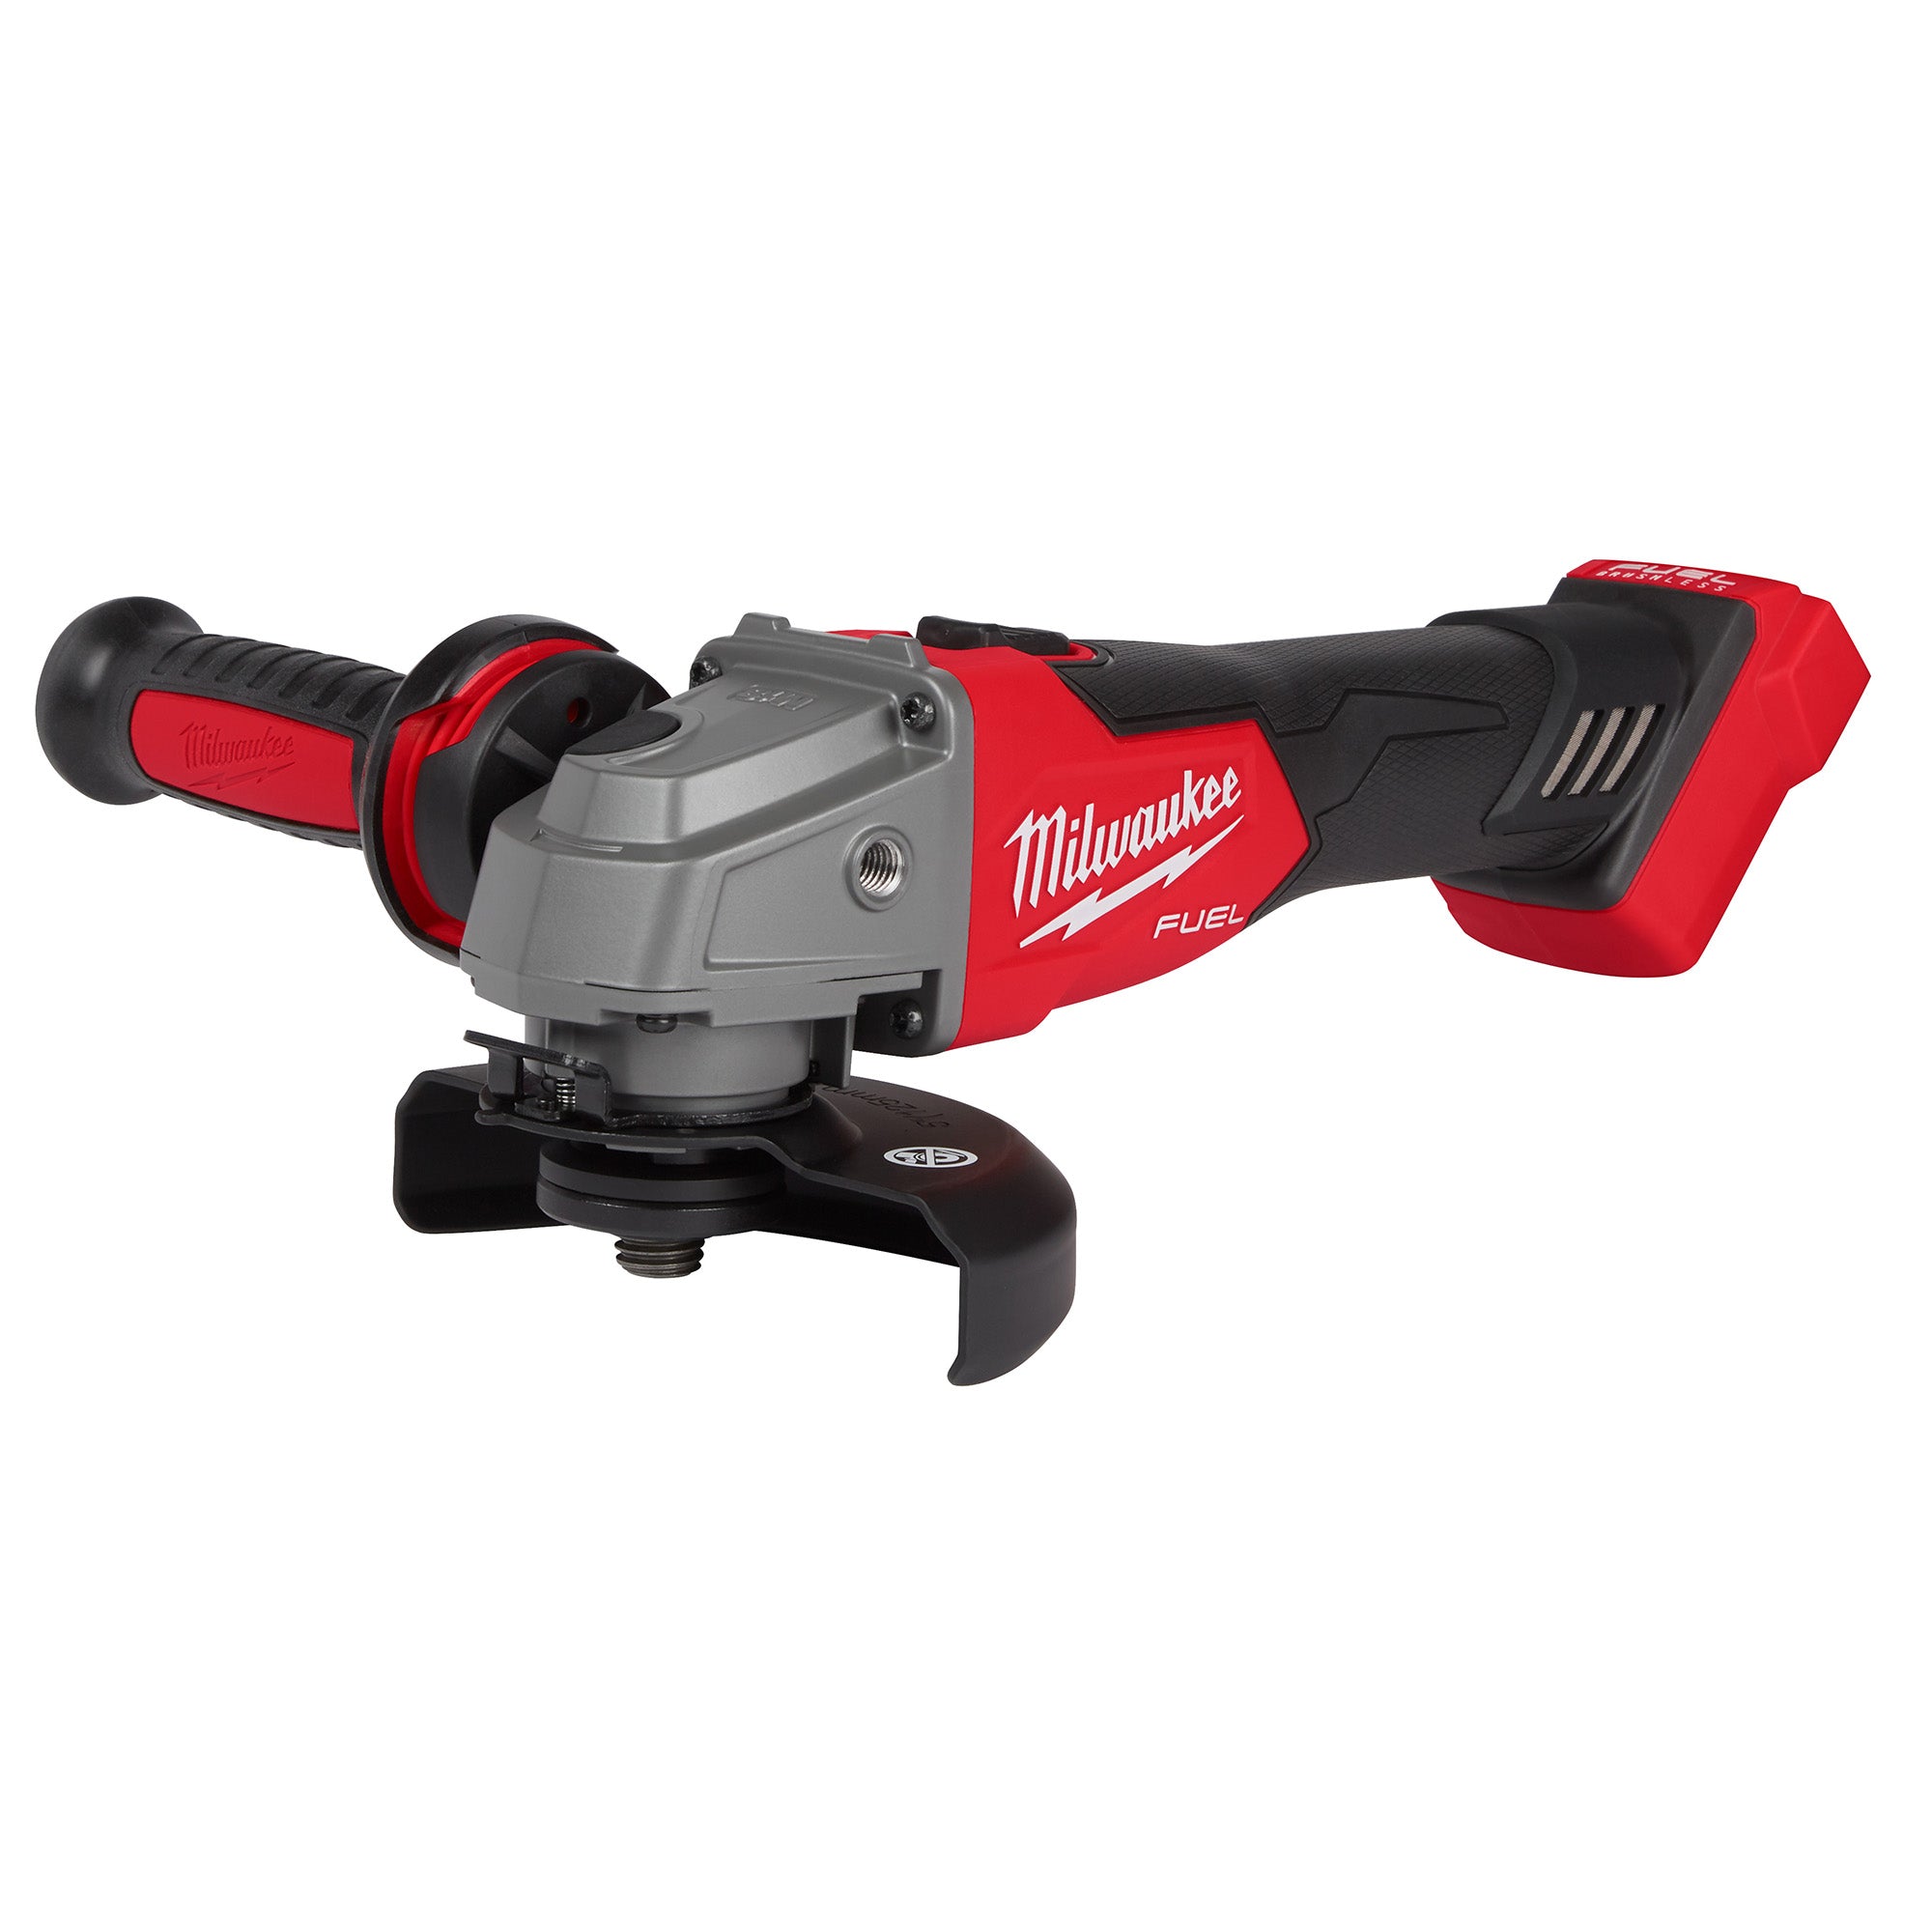 18V M18 FUEL Lithium-Ion Brushless Cordless 4-1/2" / 5" Grinder Slide Switch, Lock-On (Tool Only)